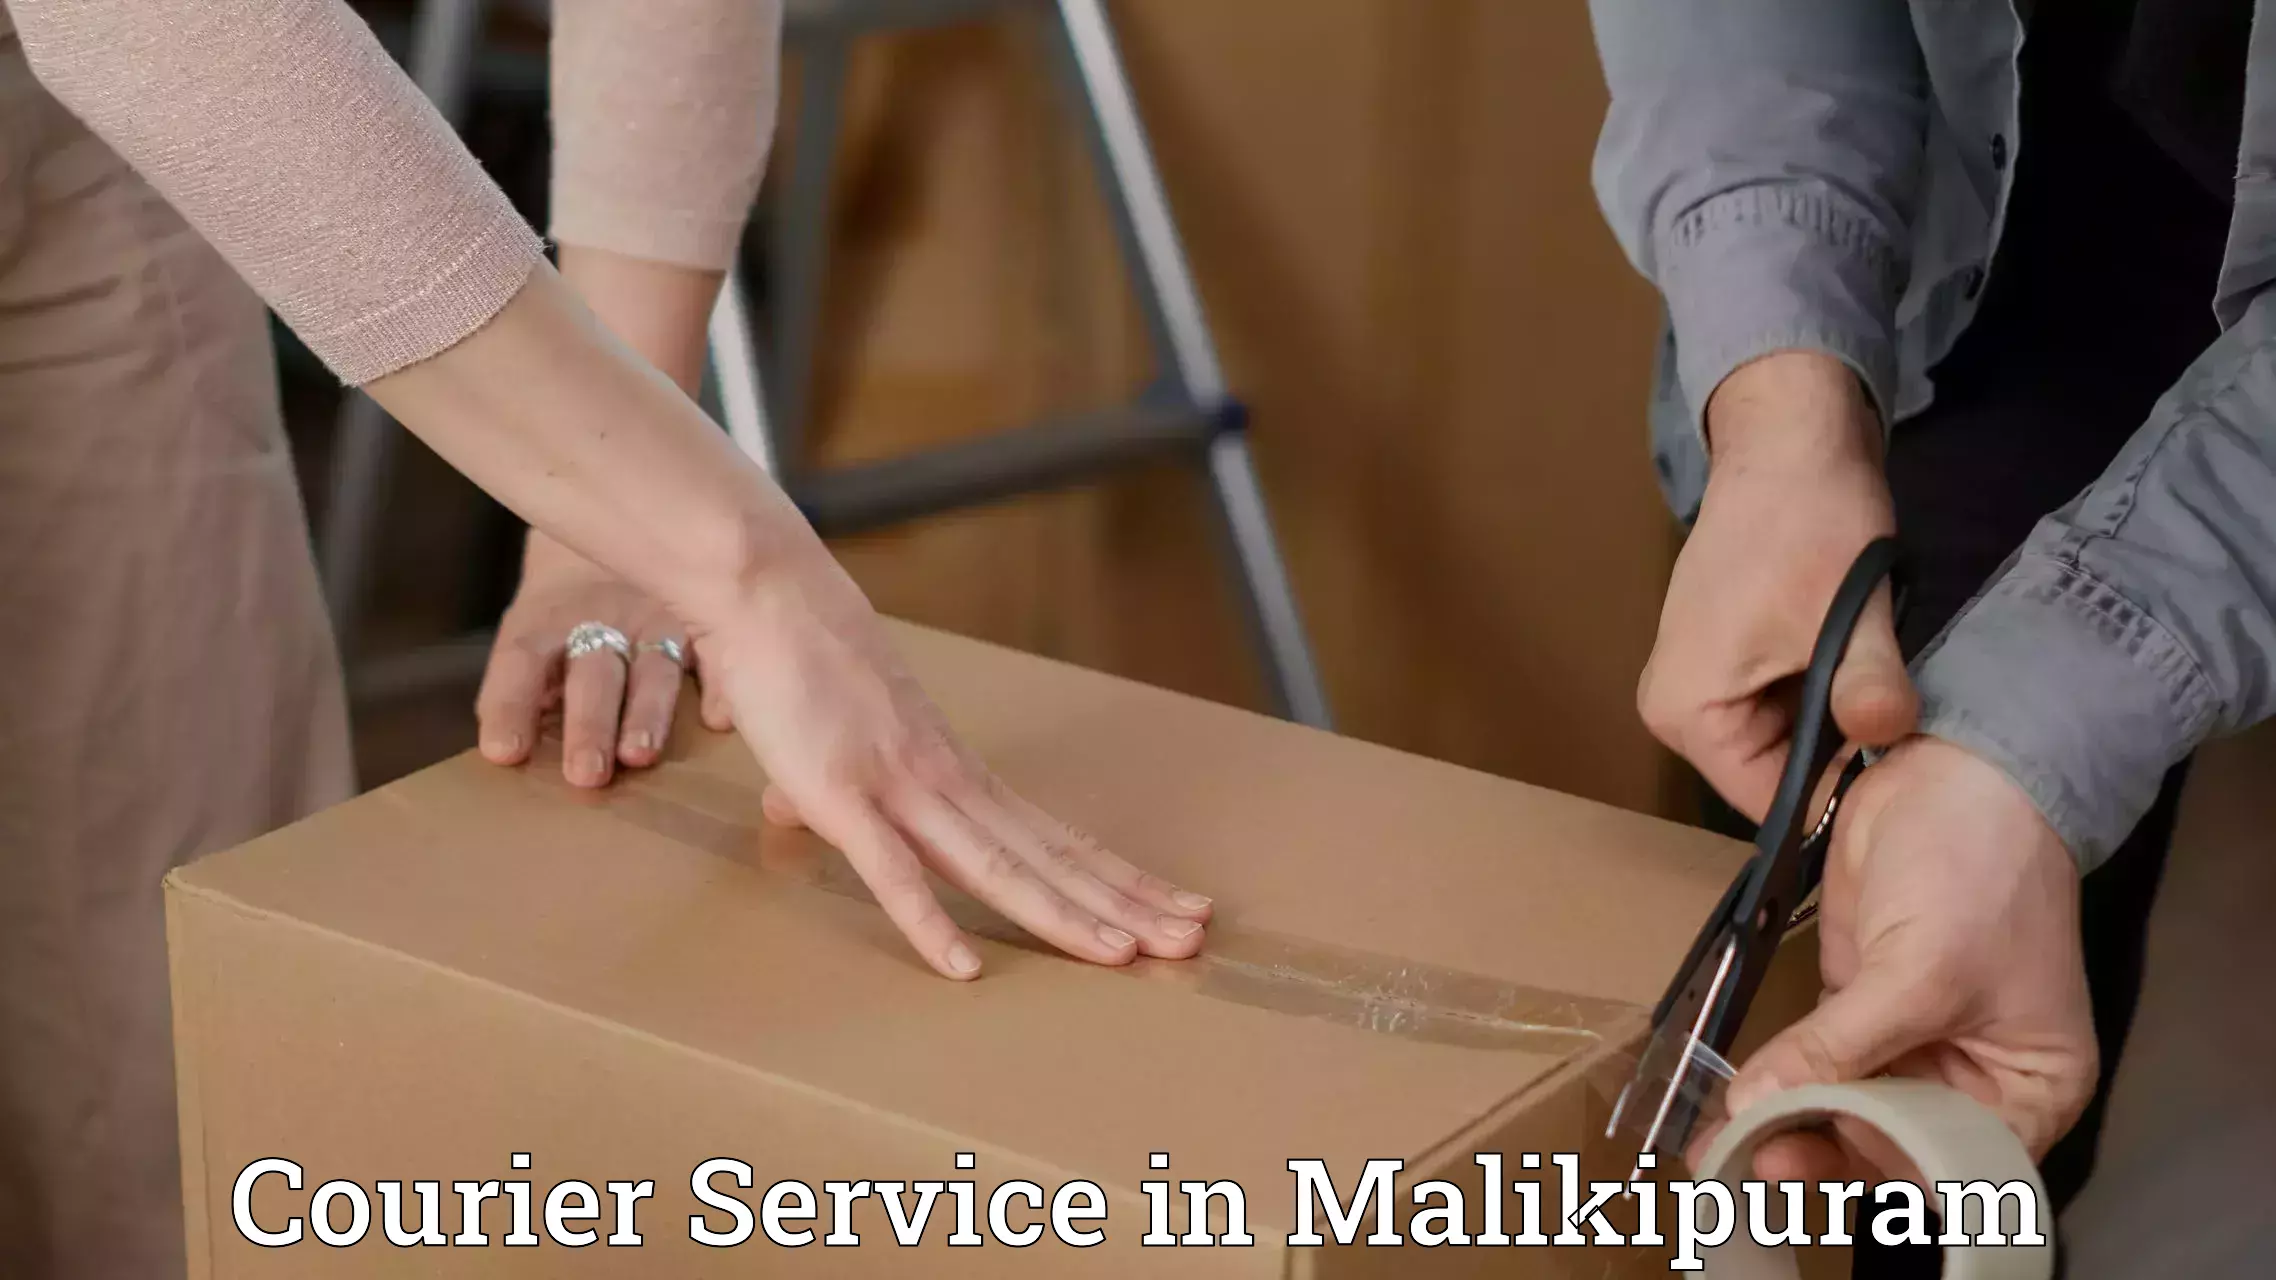 Reliable delivery network in Malikipuram